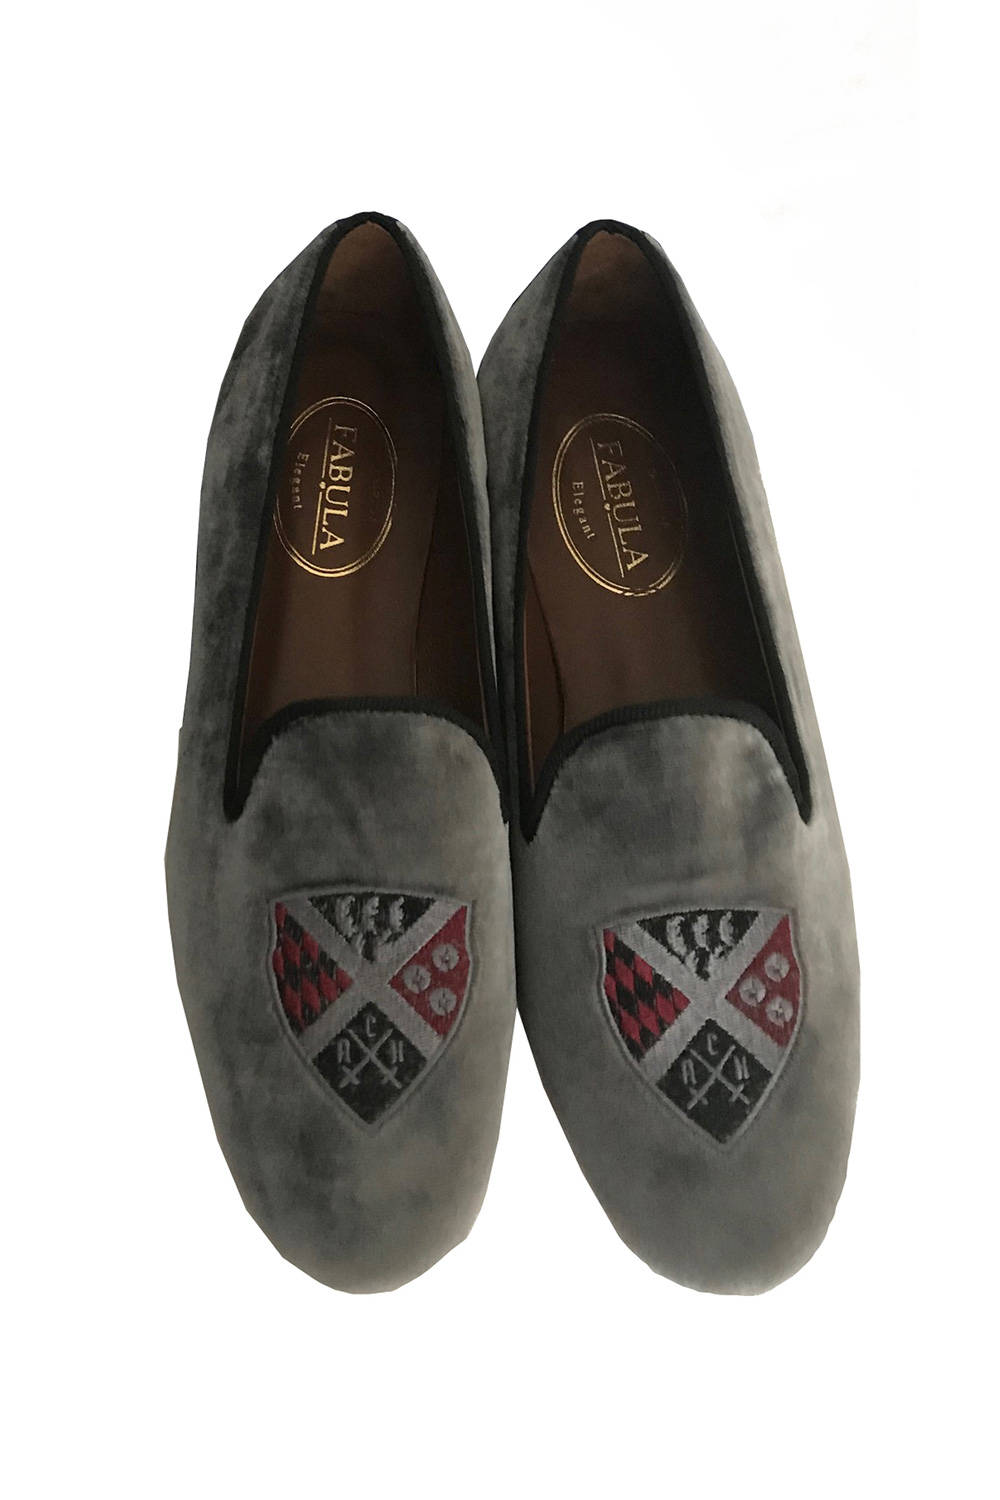 gray velvet slippers for men with a burgundy embroidery